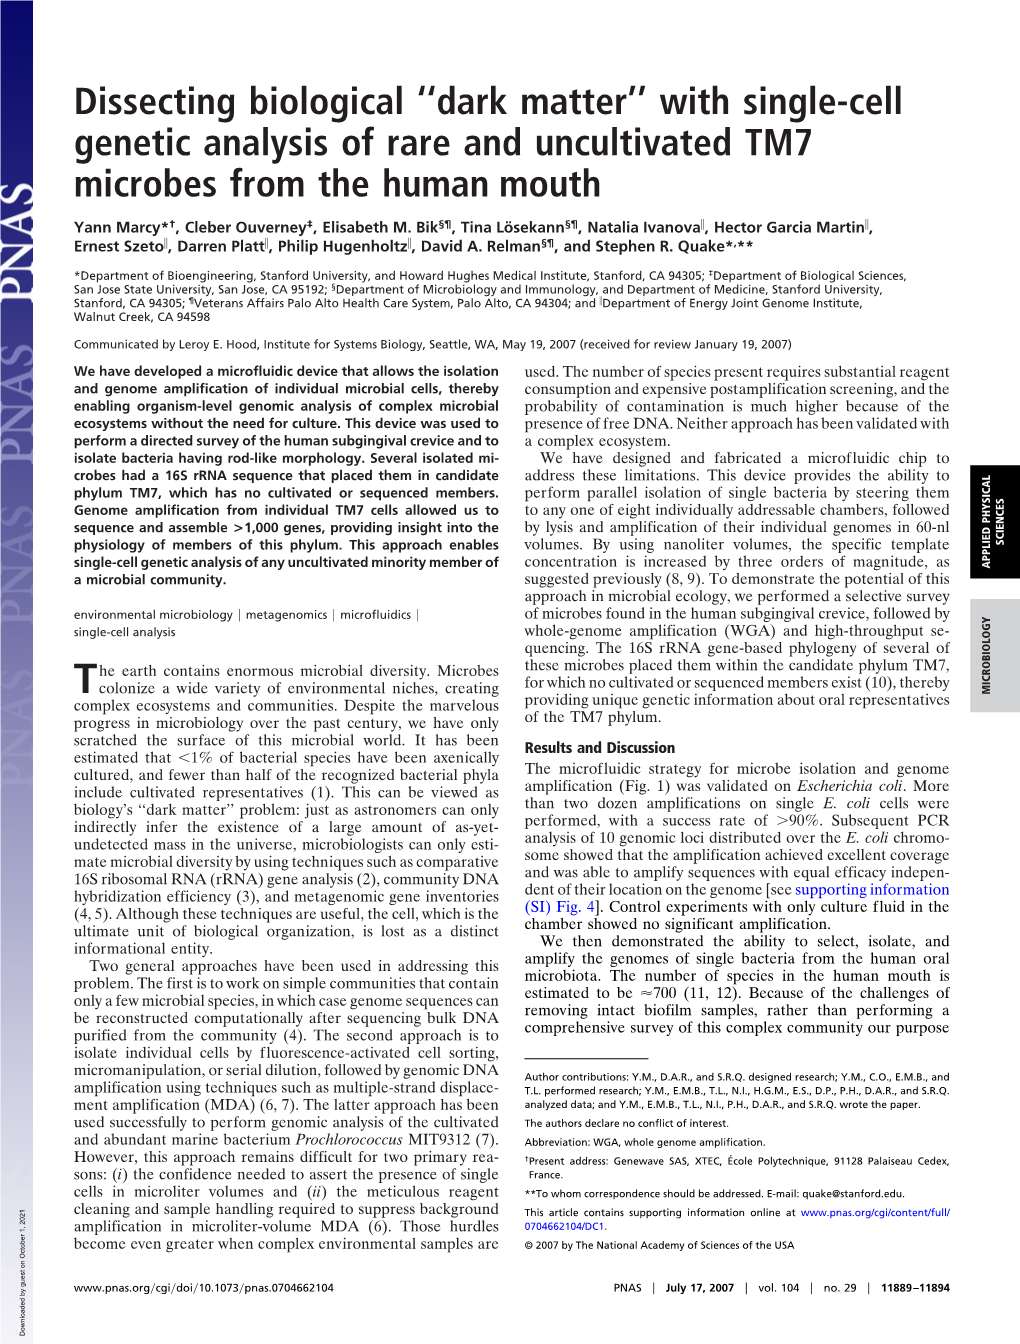 With Single-Cell Genetic Analysis of Rare and Uncultivated TM7 Microbes from the Human Mouth